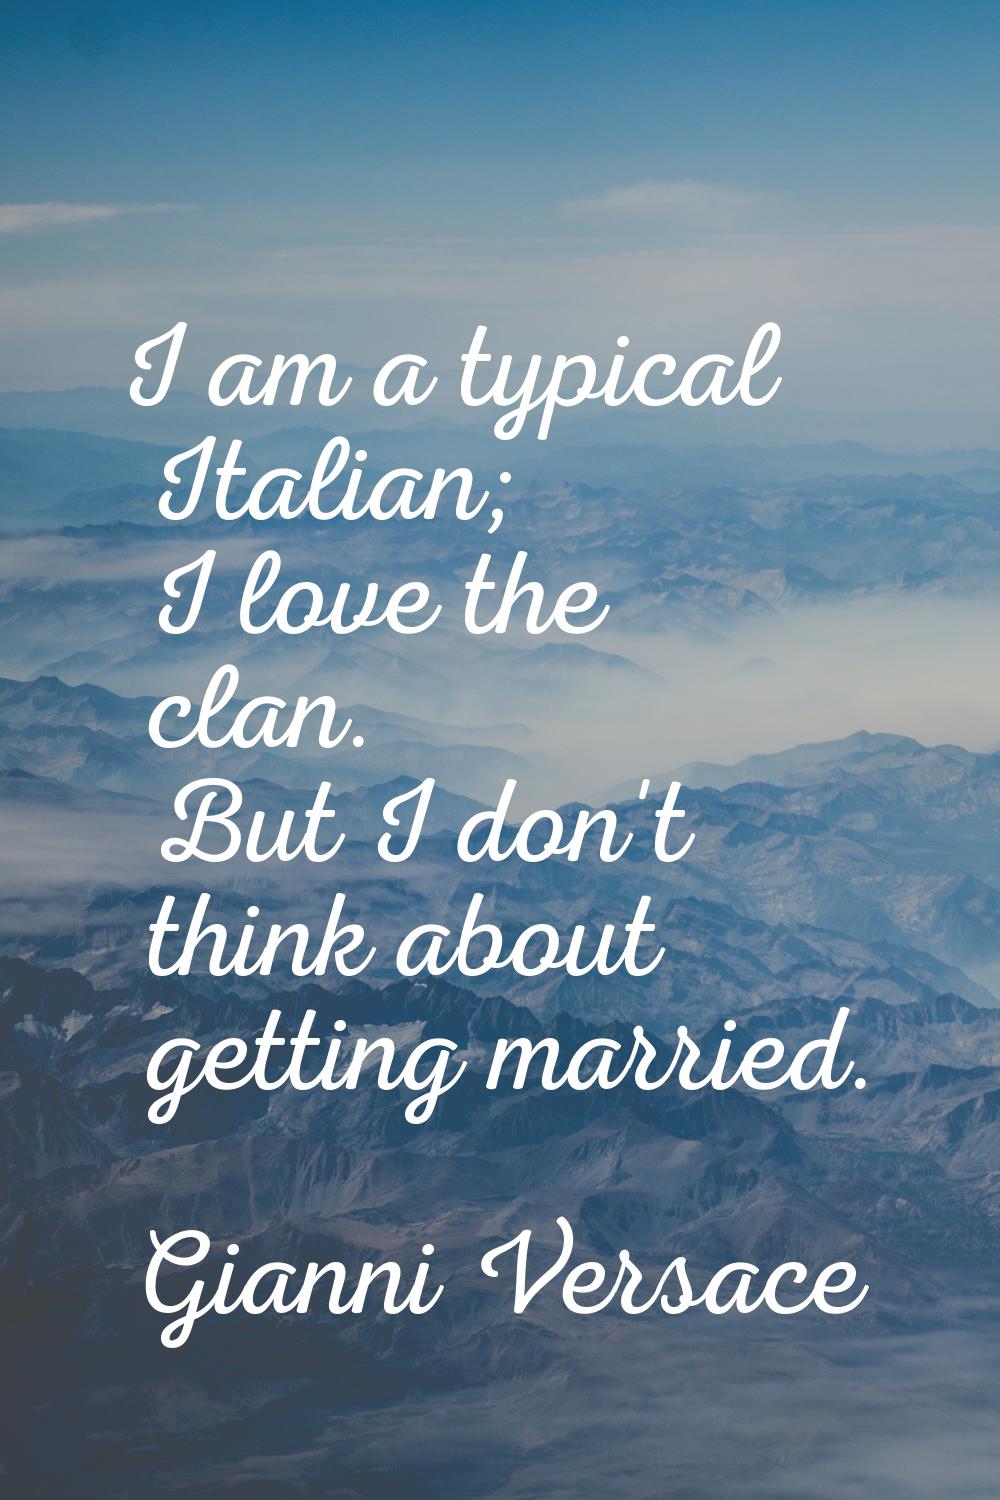 I am a typical Italian; I love the clan. But I don't think about getting married.